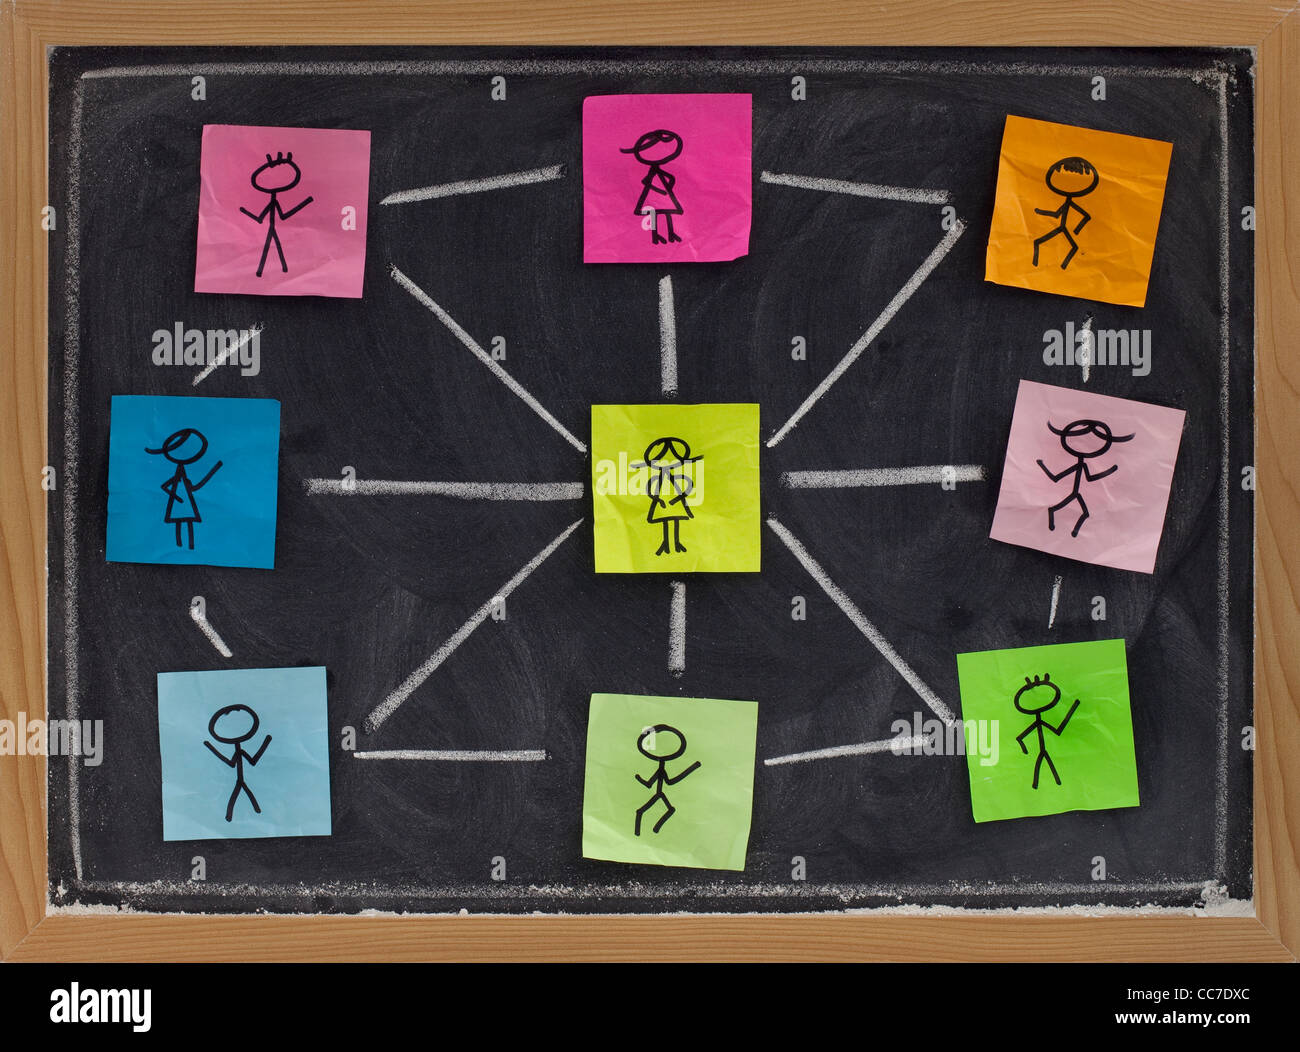 social networking concept - child style drawing and sticky notes on blackboard Stock Photo